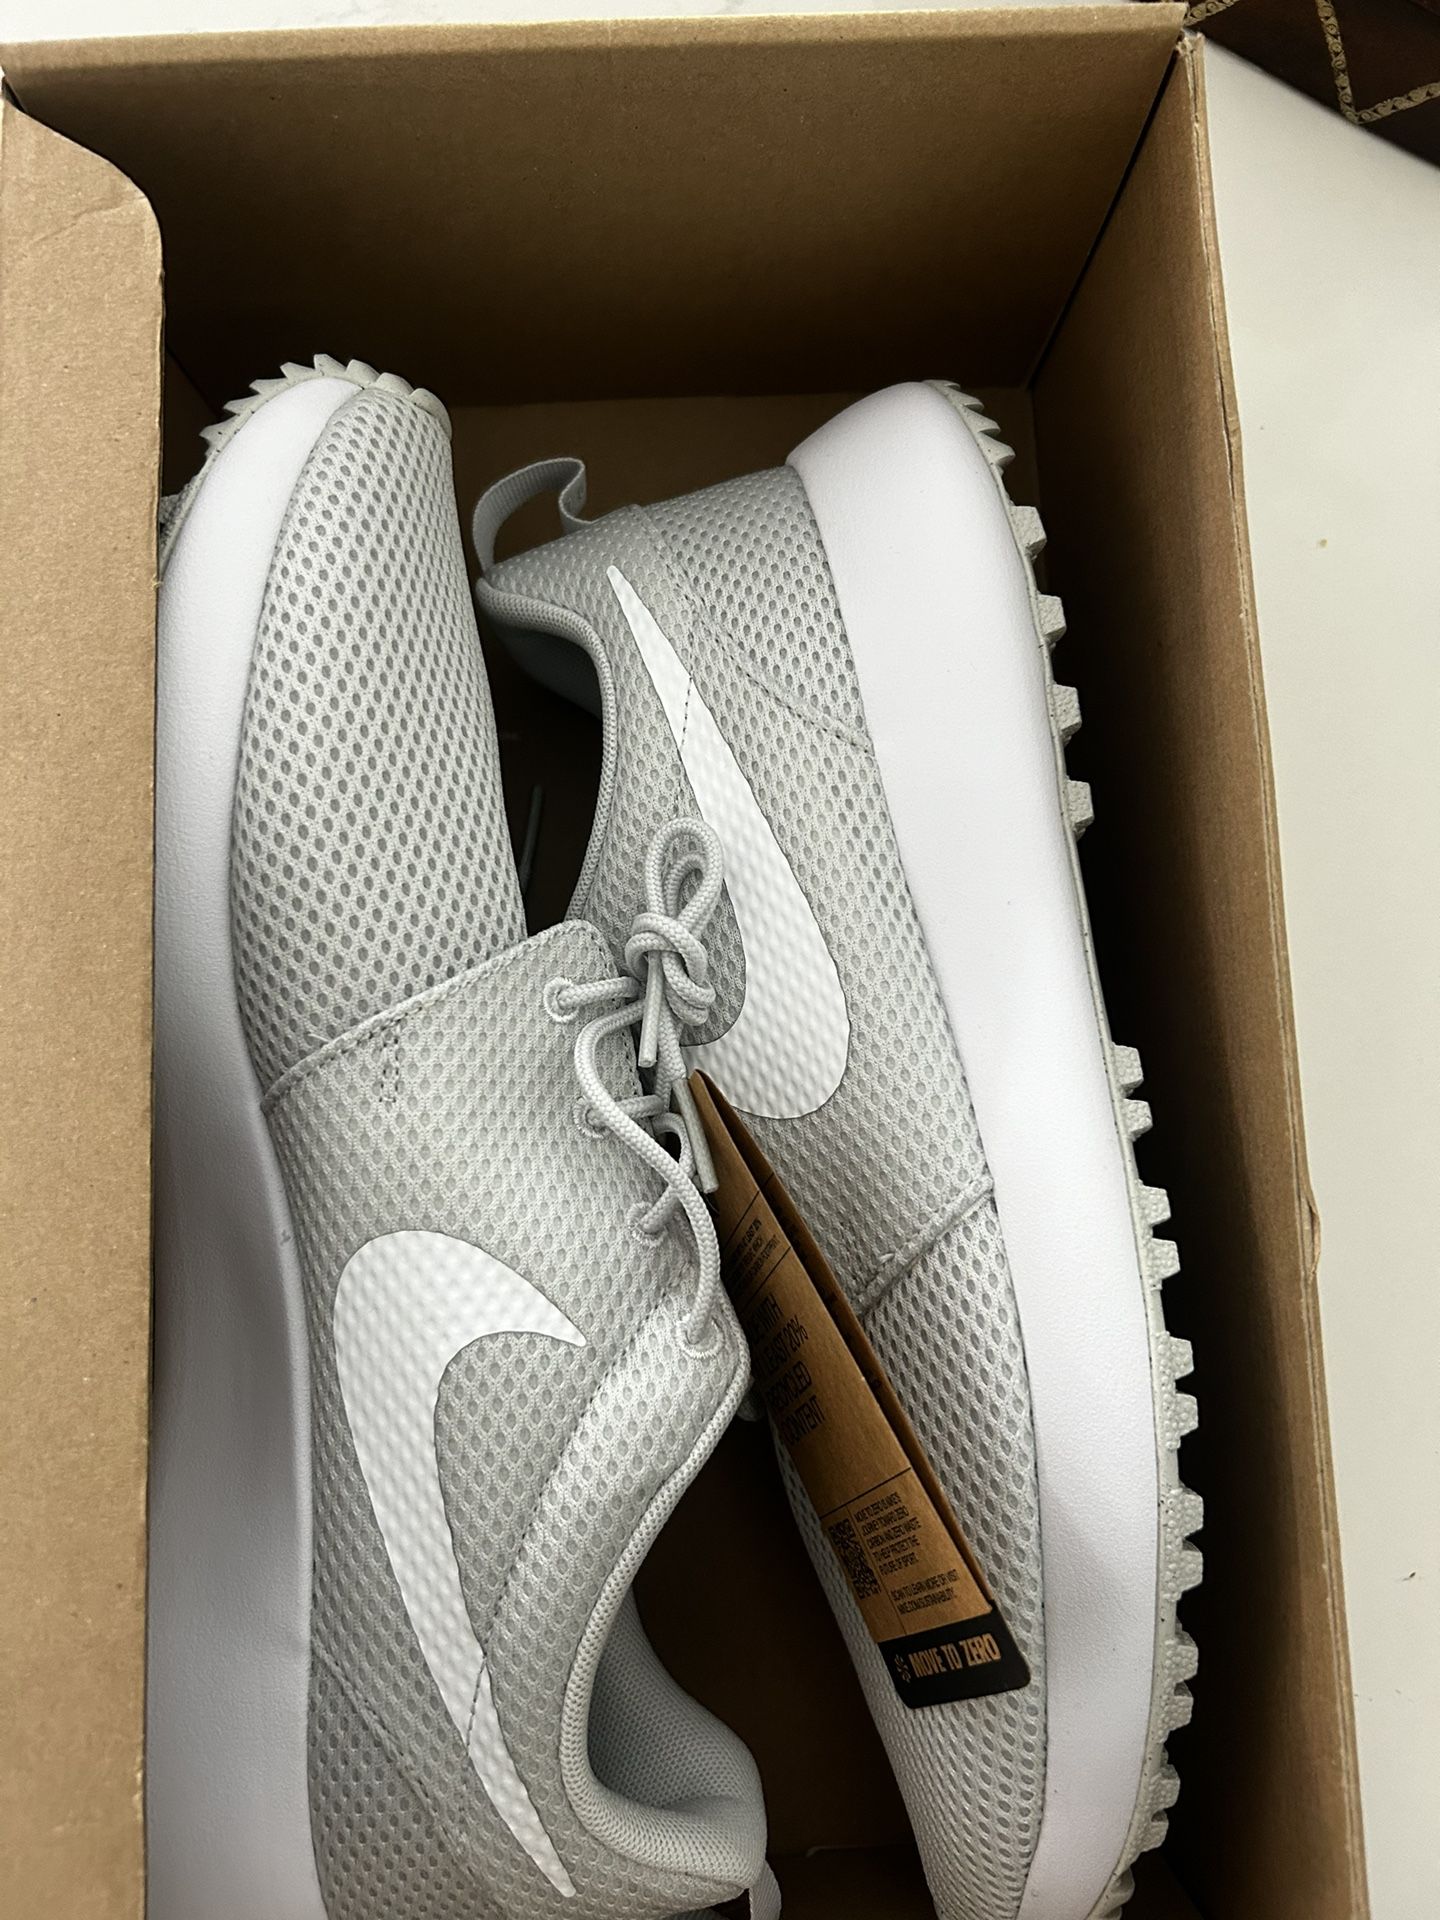 Nike Roshe Golf Shoes Brand New(Size 9.5 And 13)